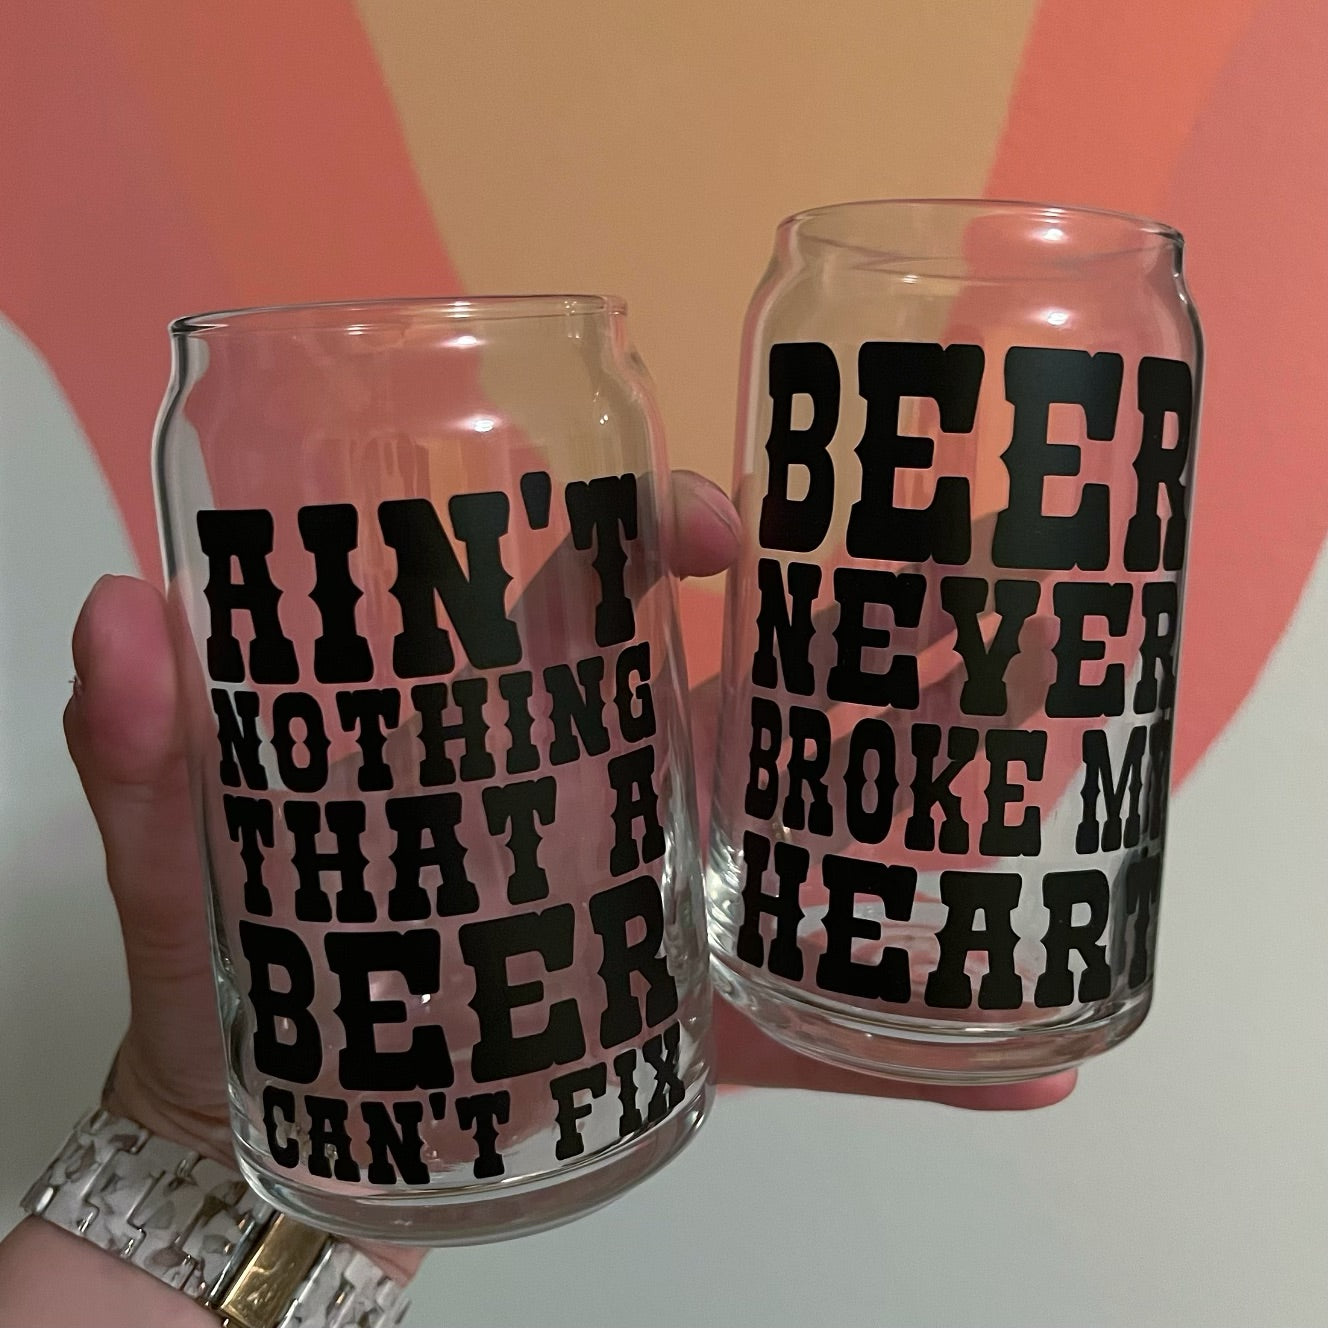 Set of 2 Beer Quote Glass Cans - Save 10%